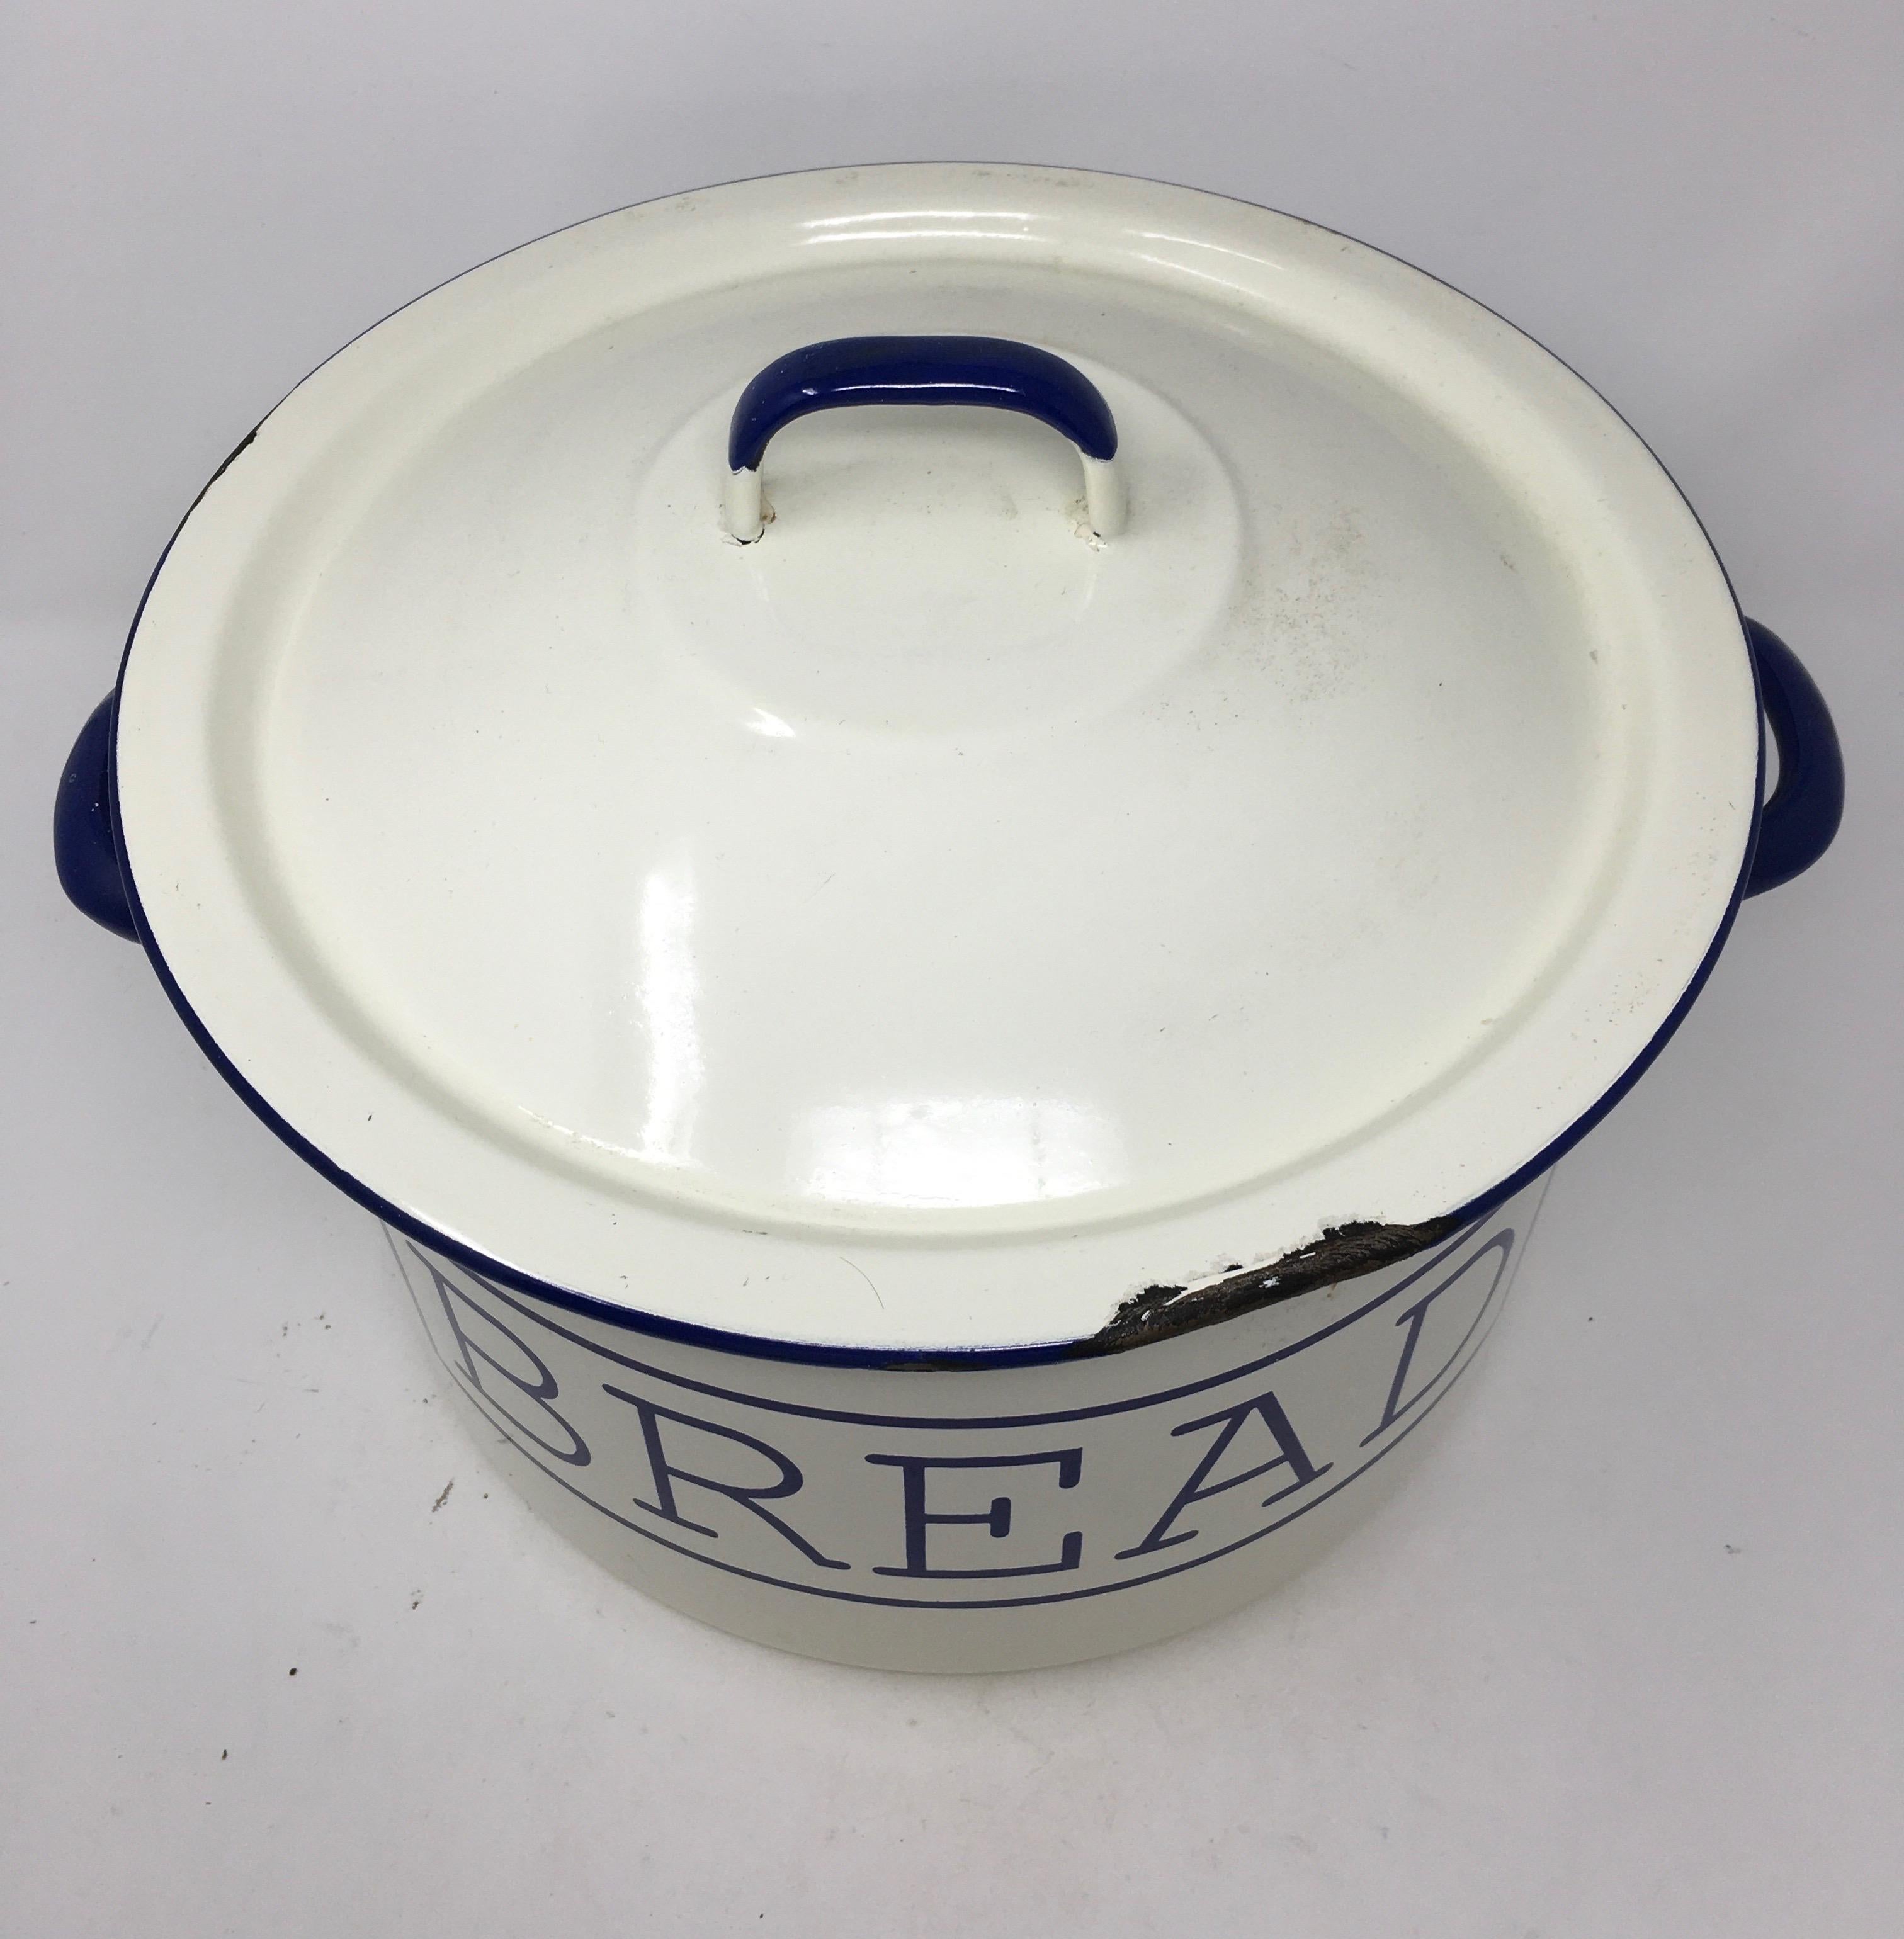 Found in England, this is an enamel bread bin with lid. Once used to store bread this piece will now add English charm to your kitchen. The white enamel is accented with blue lettering and handles.